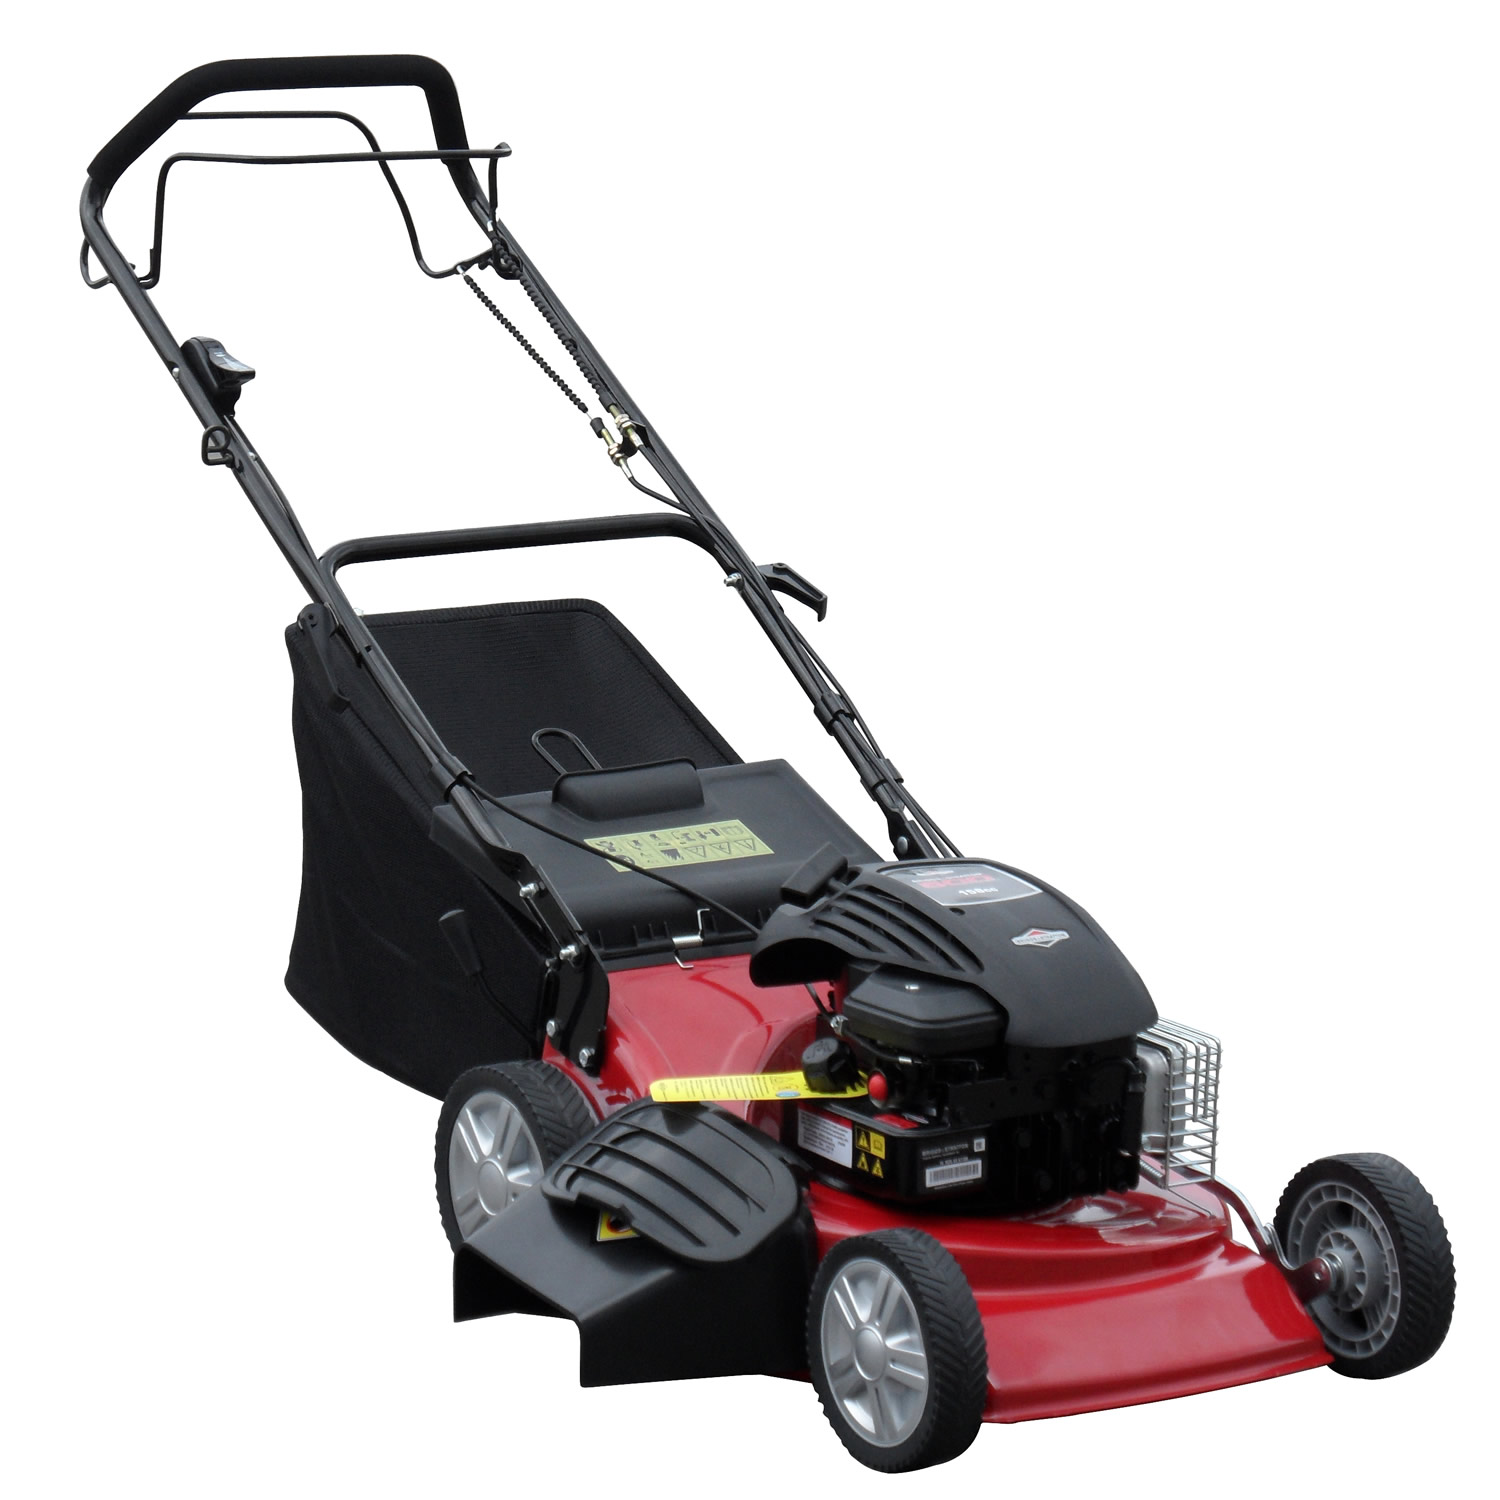 Warrior 18SP 4-in-1 Self-Propelled Petrol Lawnmower (Limited Special Offer)